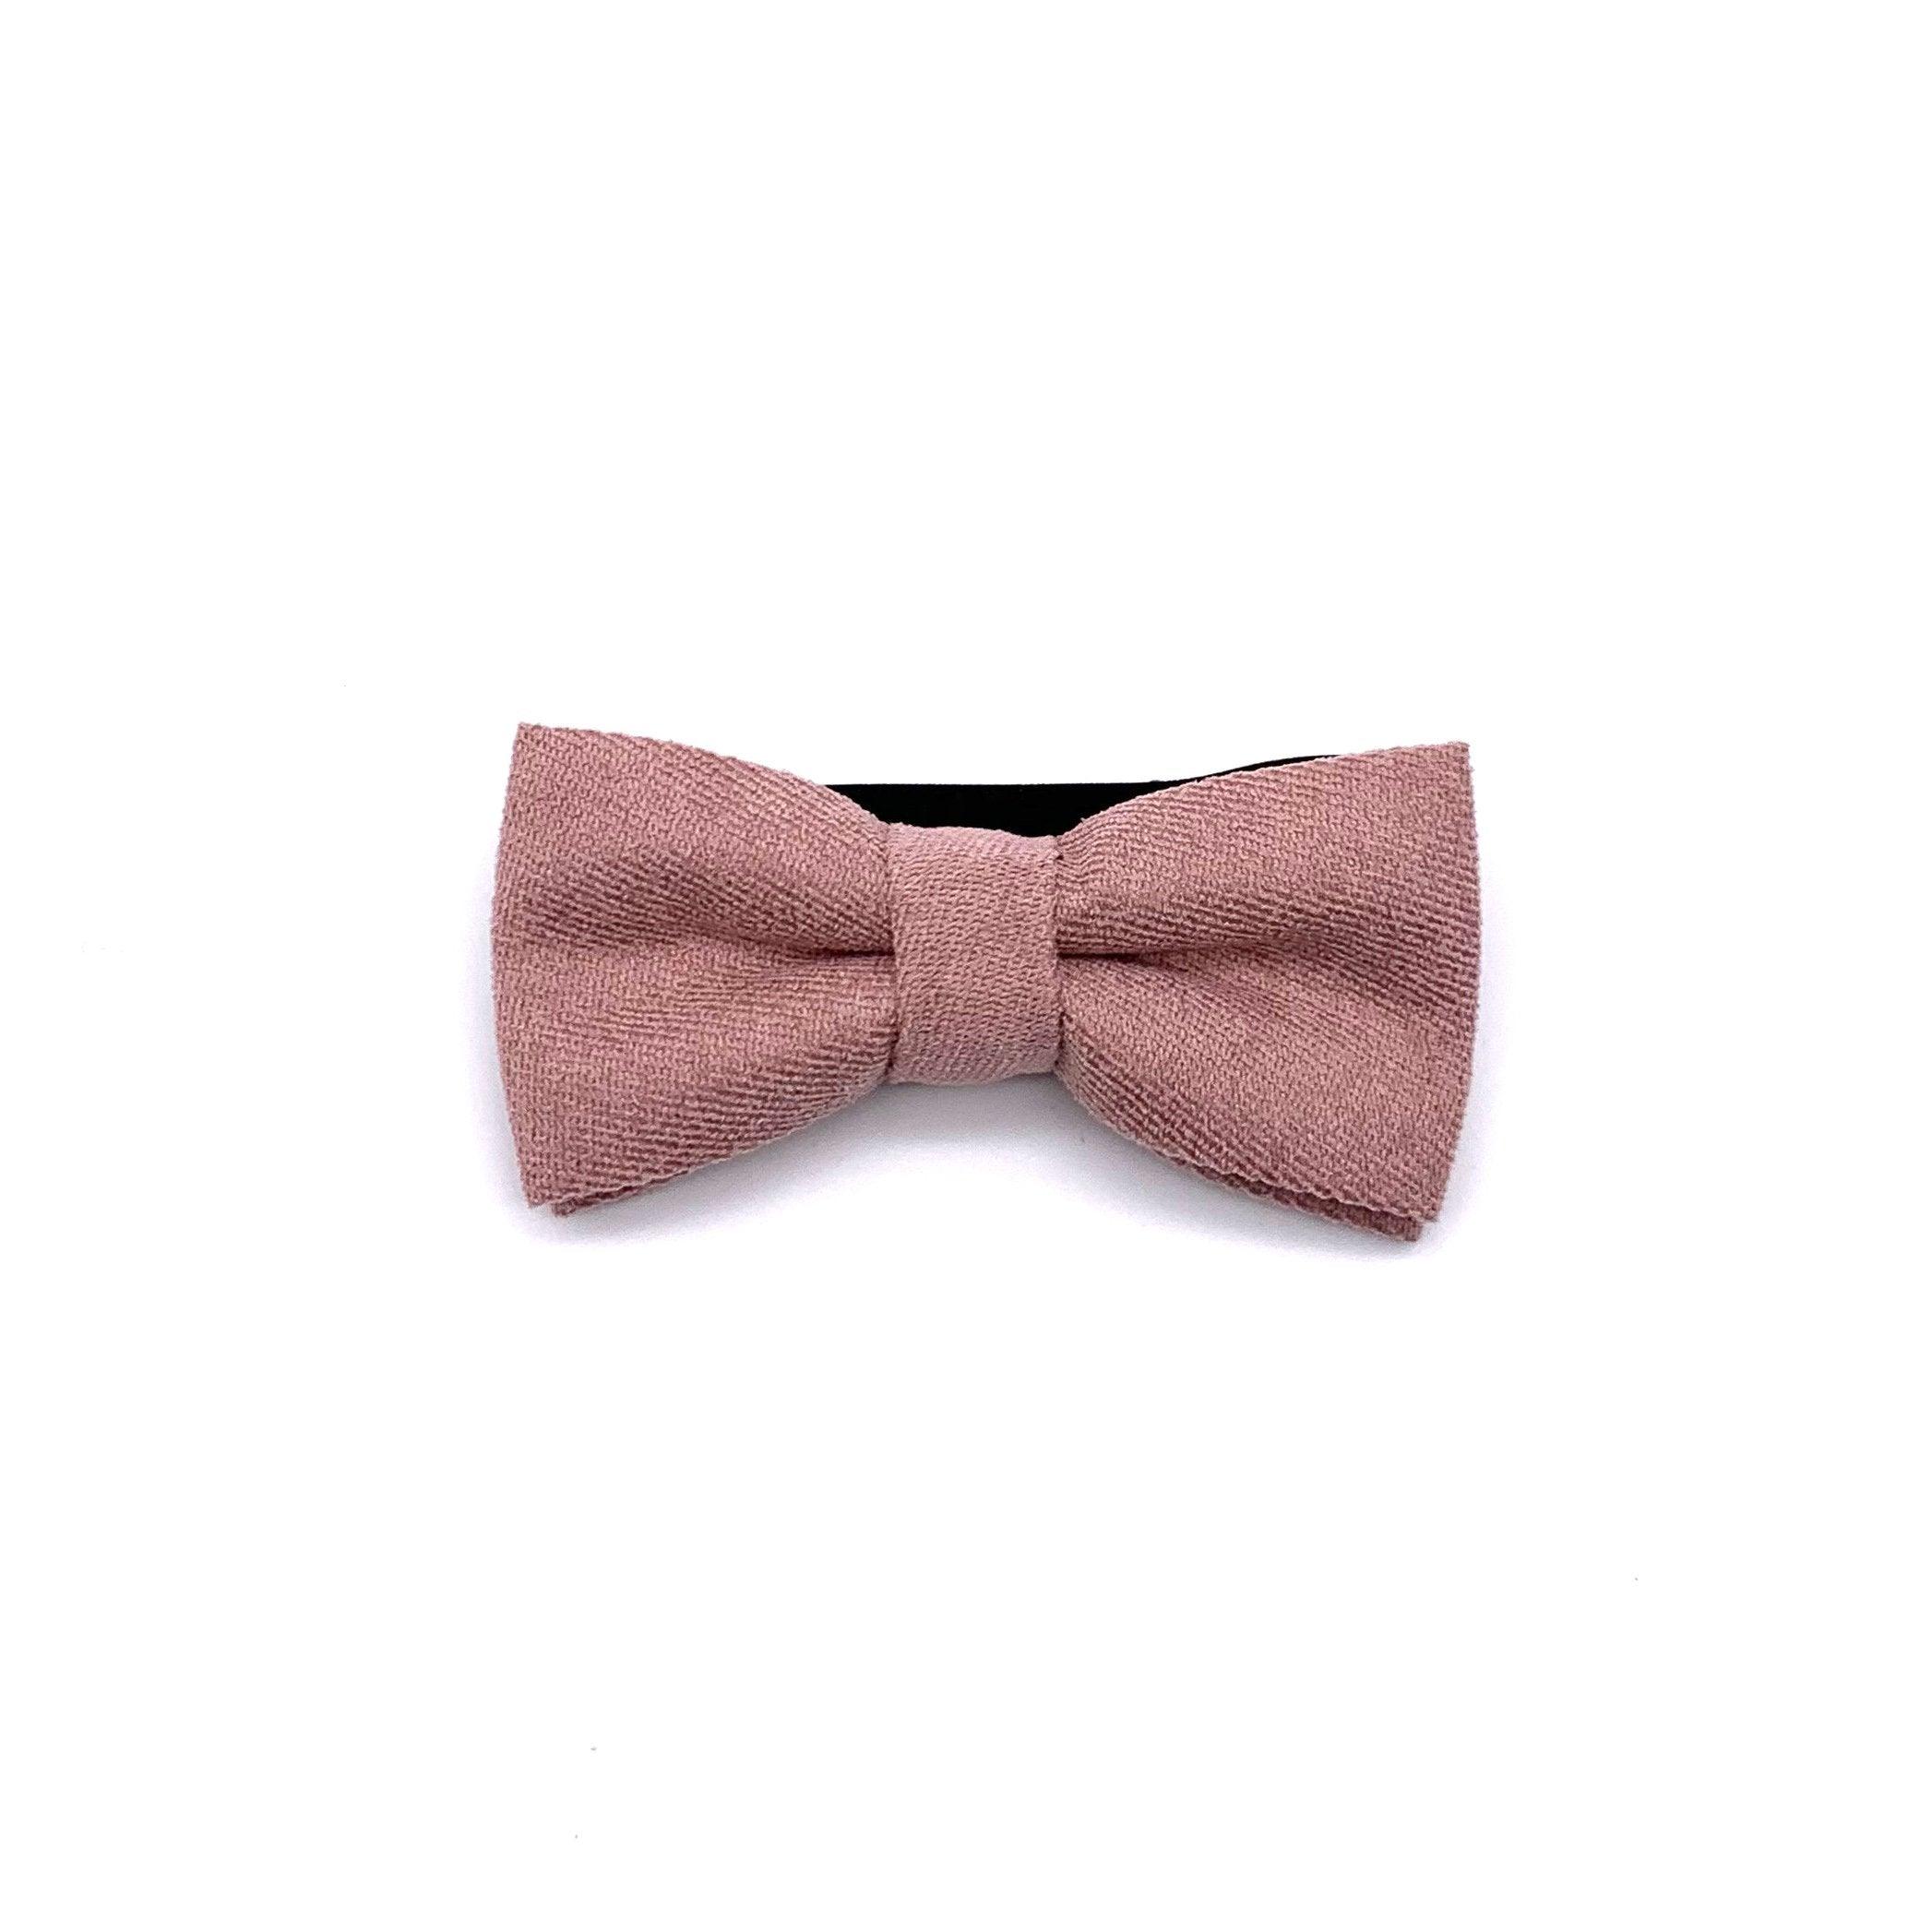 Kids Floral Baby Bow tie Mytieshop - ROSÉ-Kids Floral Baby Bow tie Color: Pink Strap is adjustablePre-Tied bowtieBow Tie 10.5 * 6CM Great for Prom Dinners Interviews Photo shoots Photo sessions Dates Wedding Attendant Ring Bearers Kid&#39;s Pink Bow Tie Fits toddlers and babies. Evabder baby ow tie toddler bow tie floral for wedding and events groom groomsmen flower bow tie mytieshop ring bearer page boy bow tie white bow tie white and blue tie kids bowtie floral Adjustable wedding attire for toddle